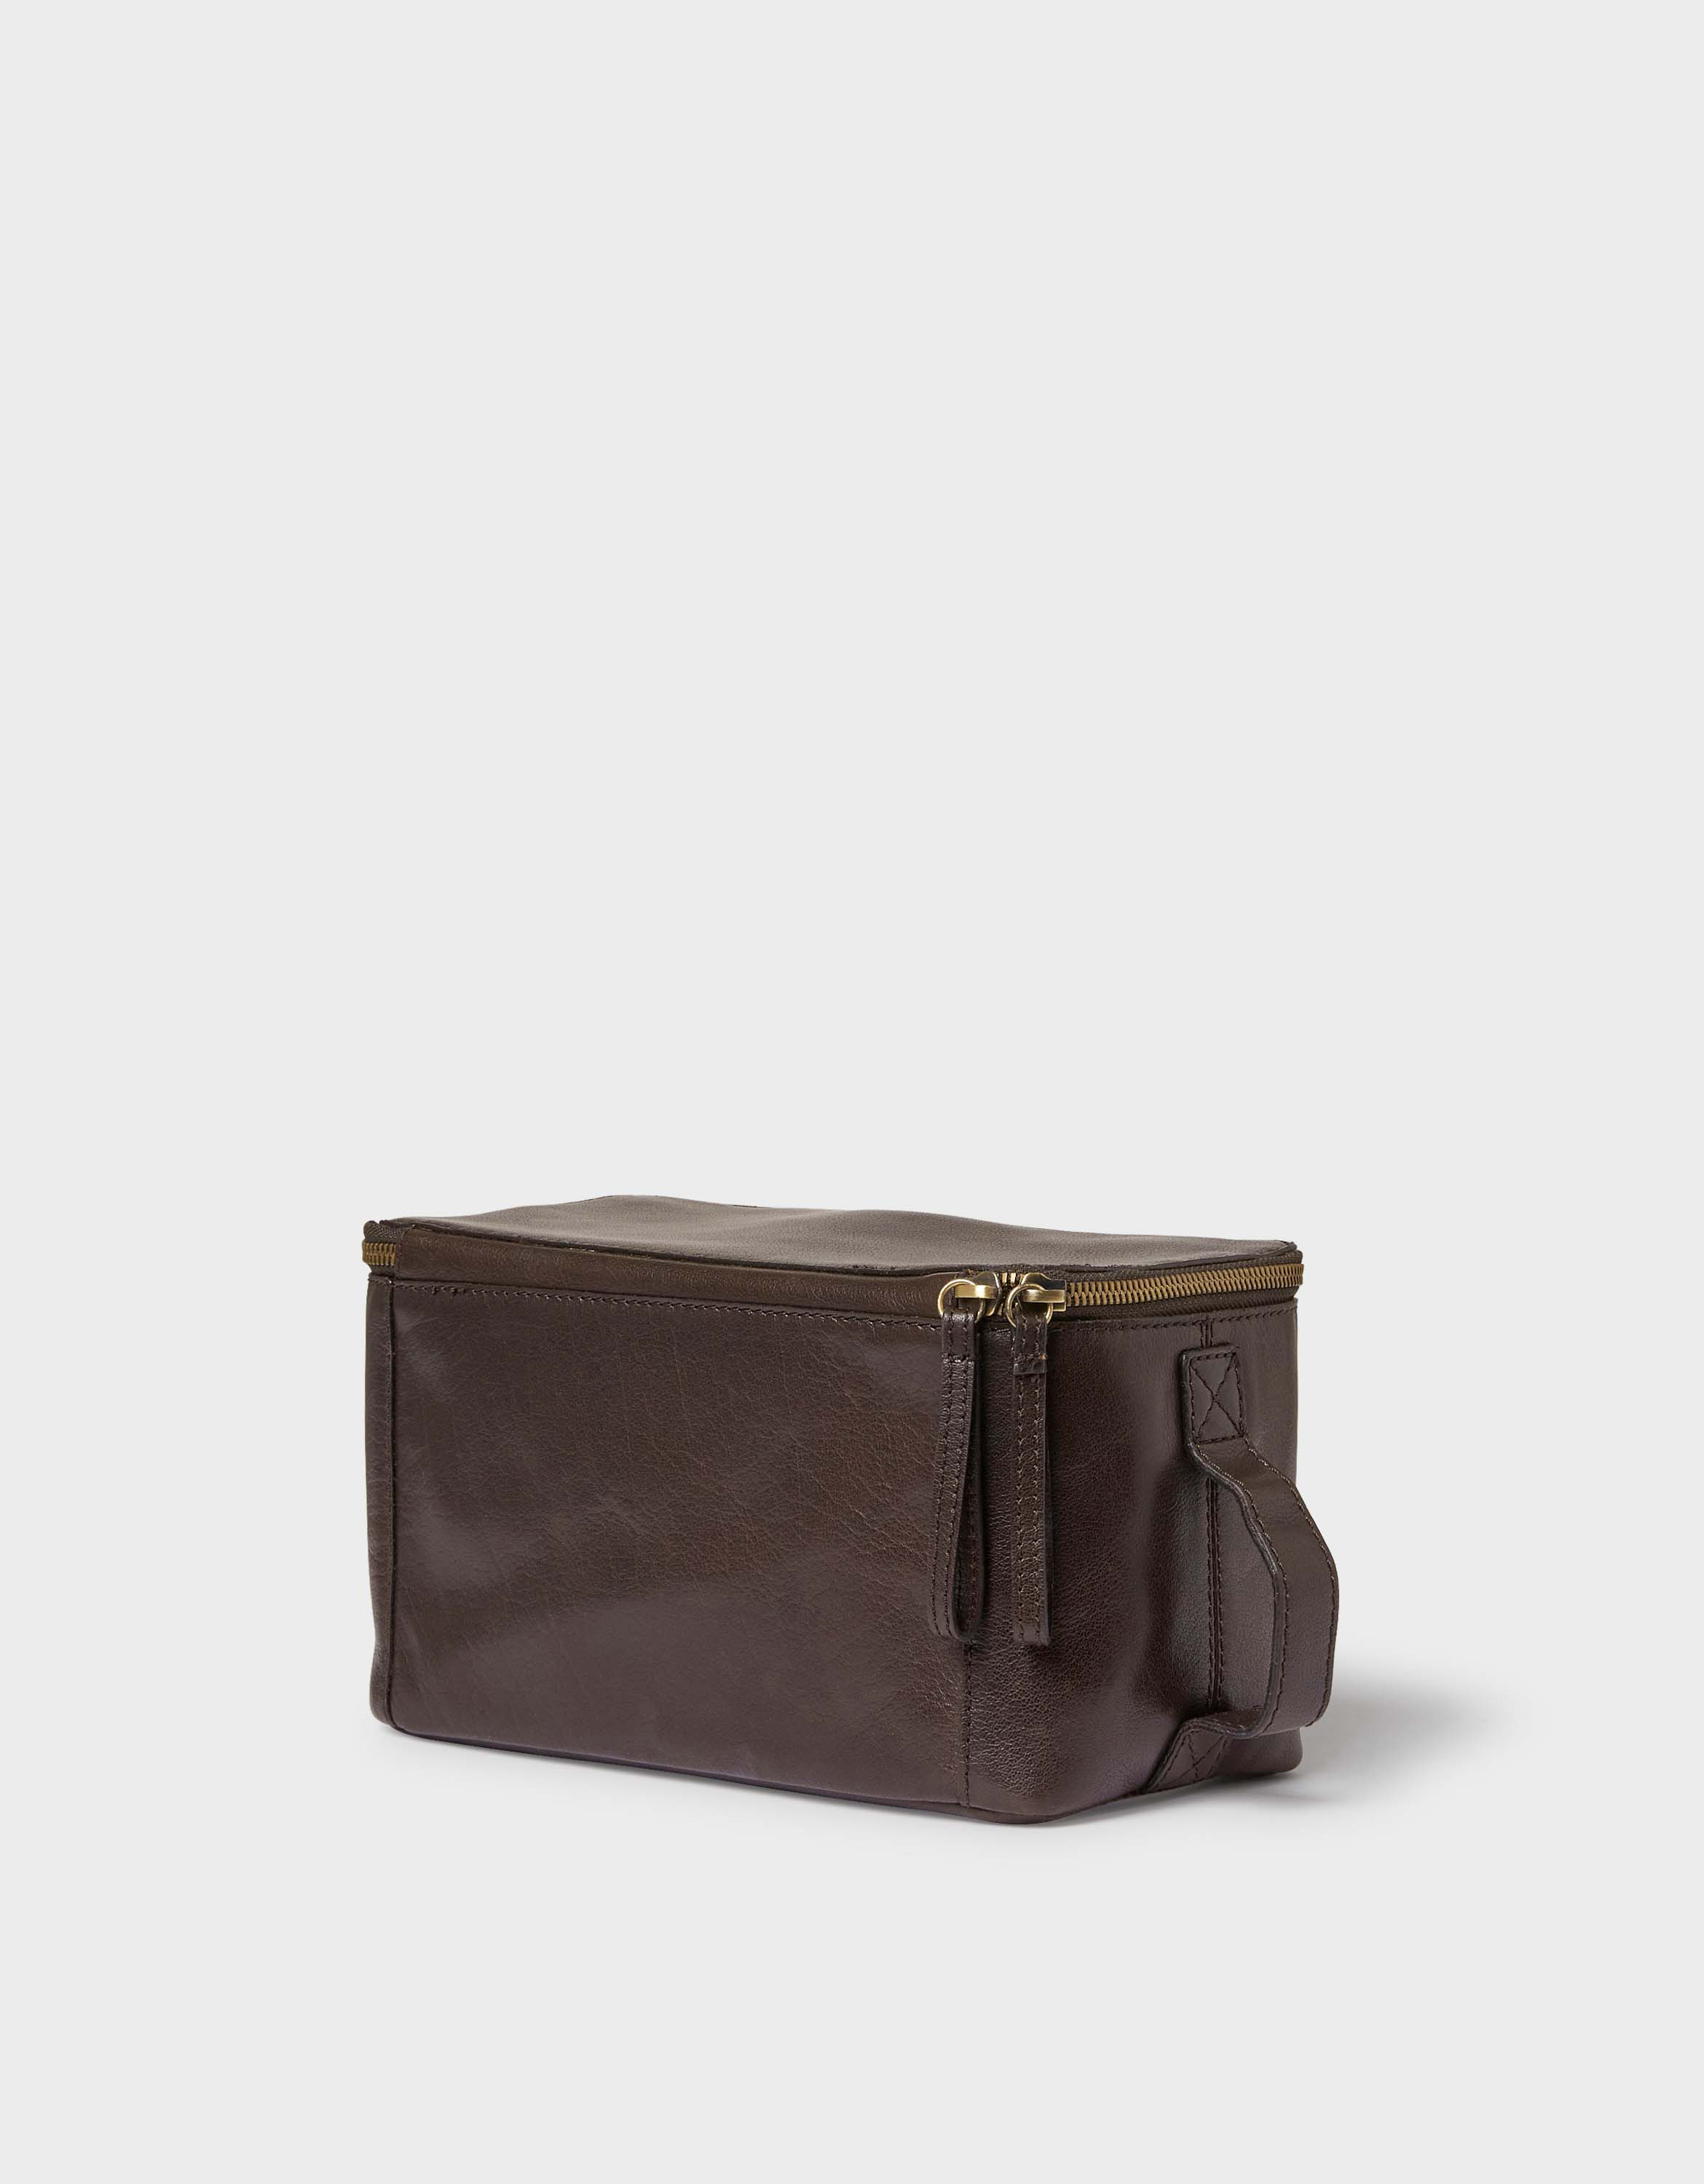 Buy Orlando weekend bag at  - The swedish leather brand